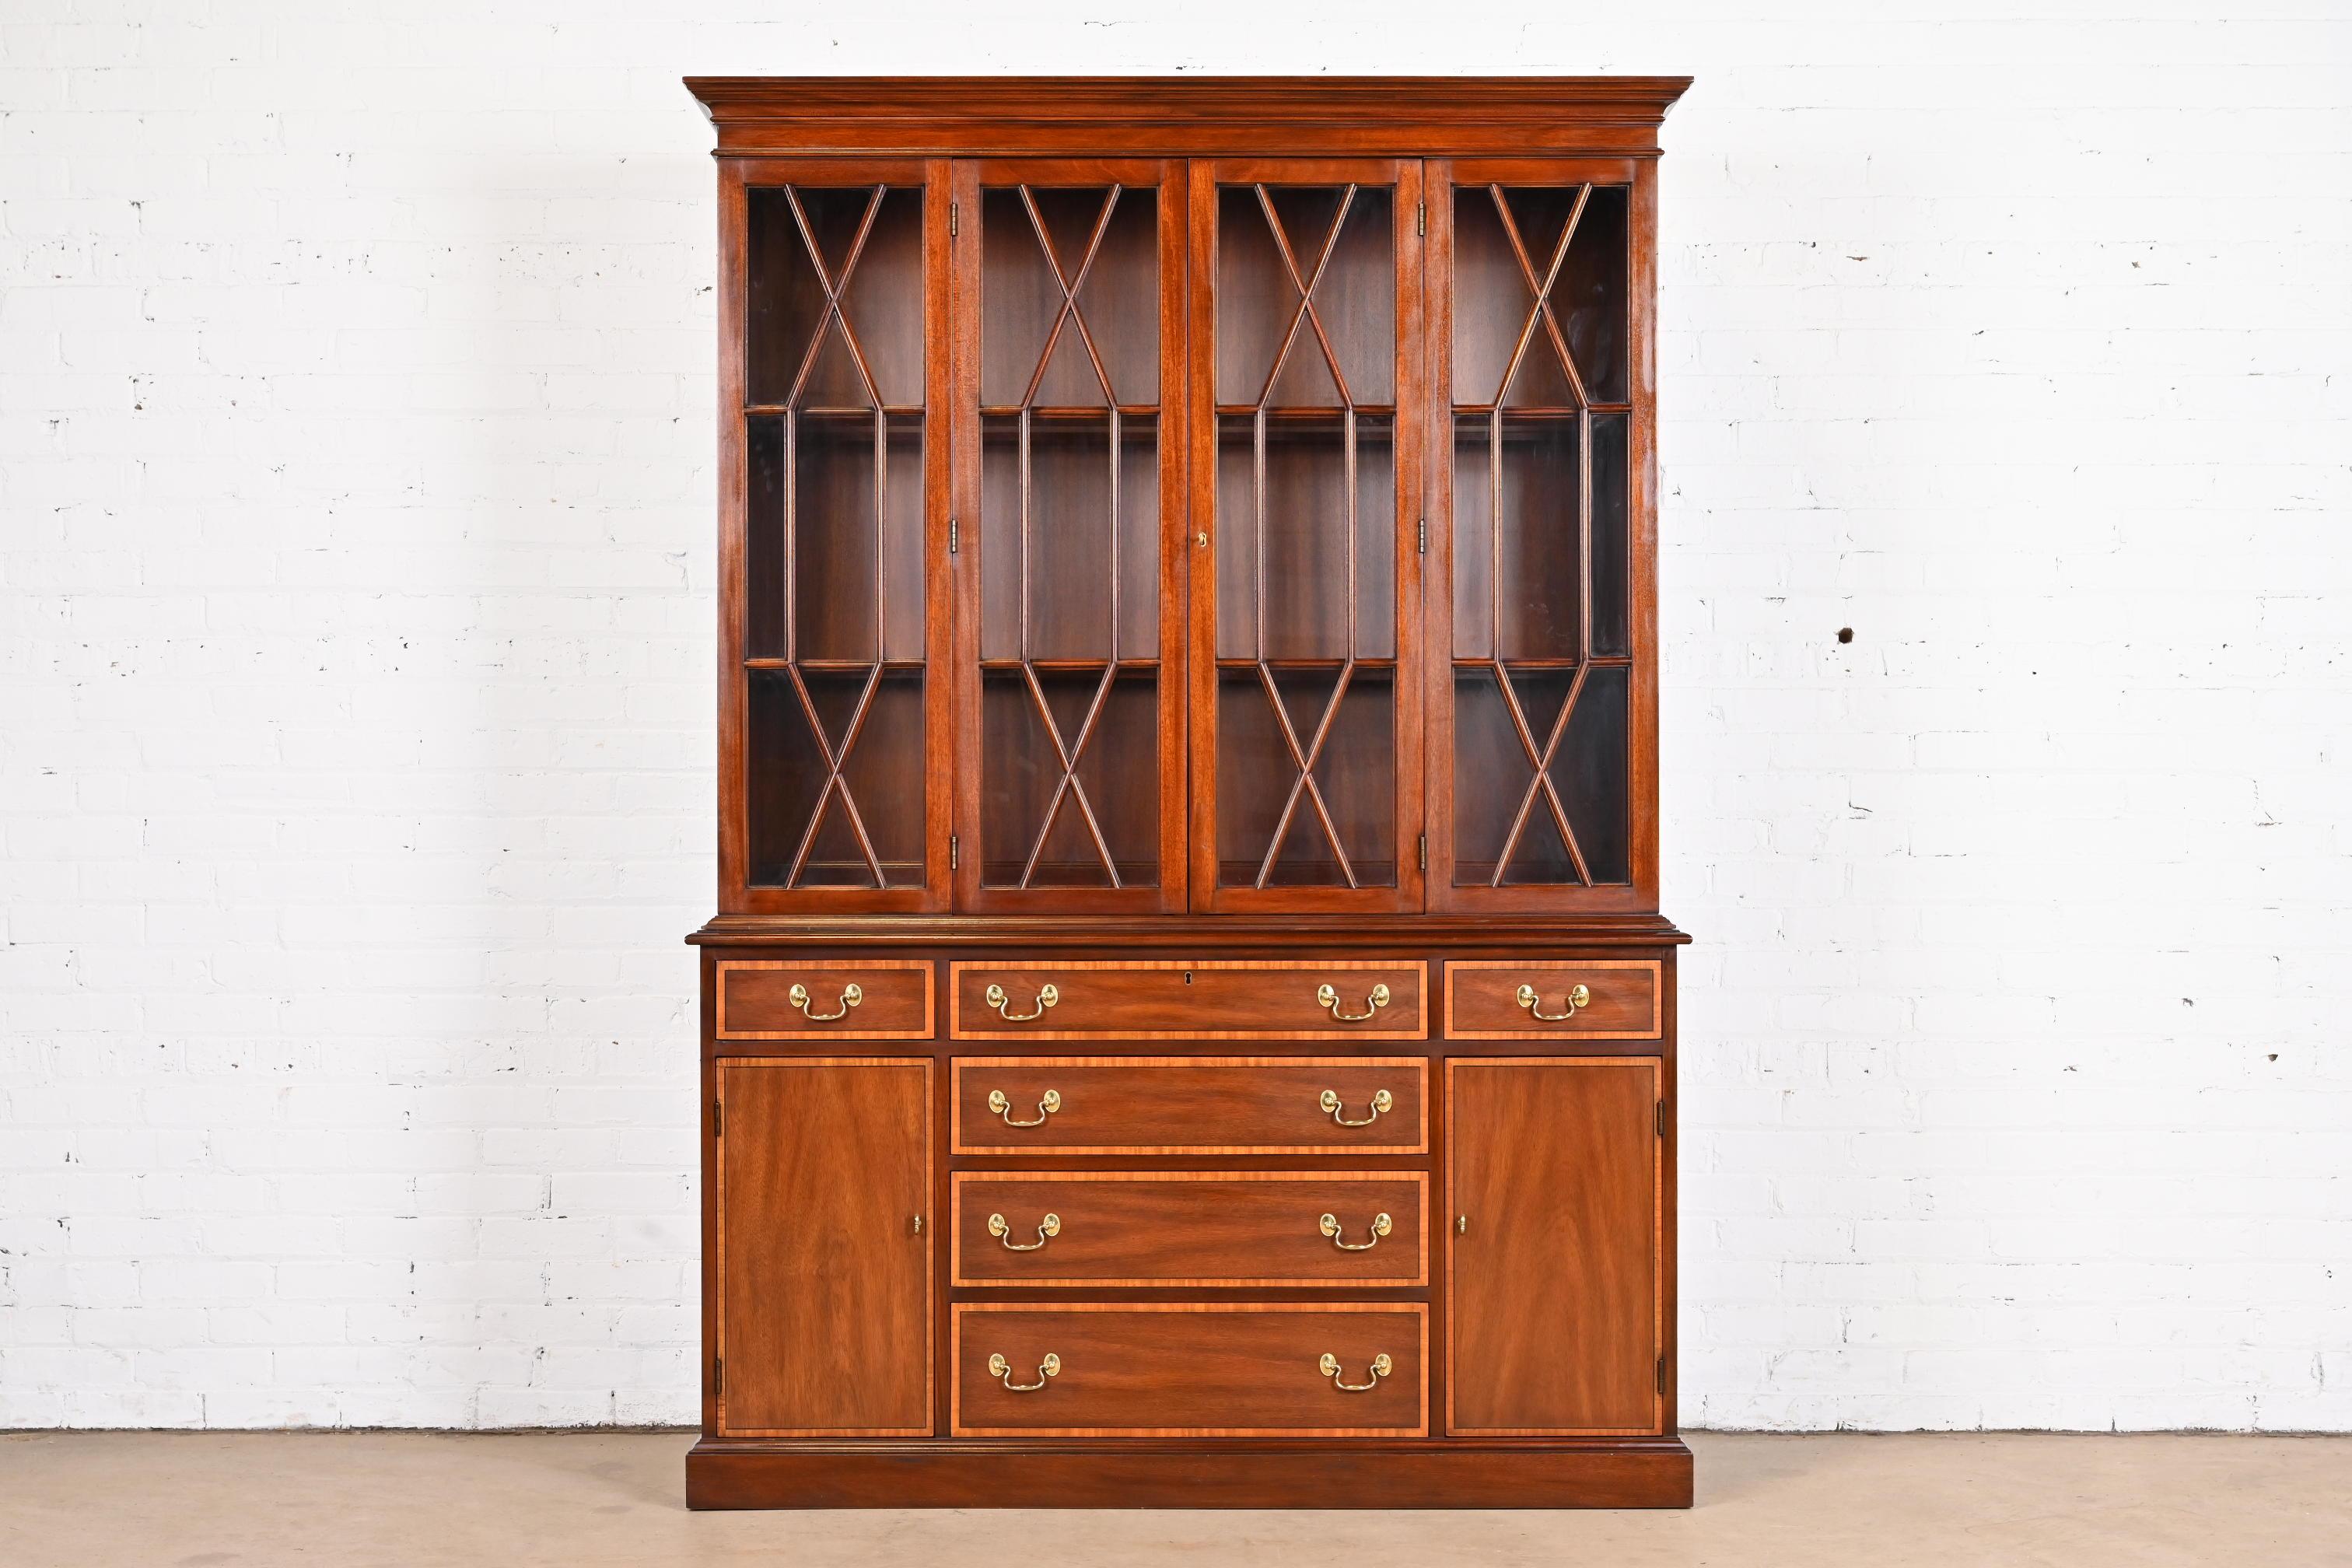 A gorgeous Georgian or Chippendale style lighted breakfront bookcase or dining cabinet

By Henkel Harris

USA, 1986

Mahogany, with satinwood banding, mullioned glass front doors, and original brass hardware. Lights have been tested and are